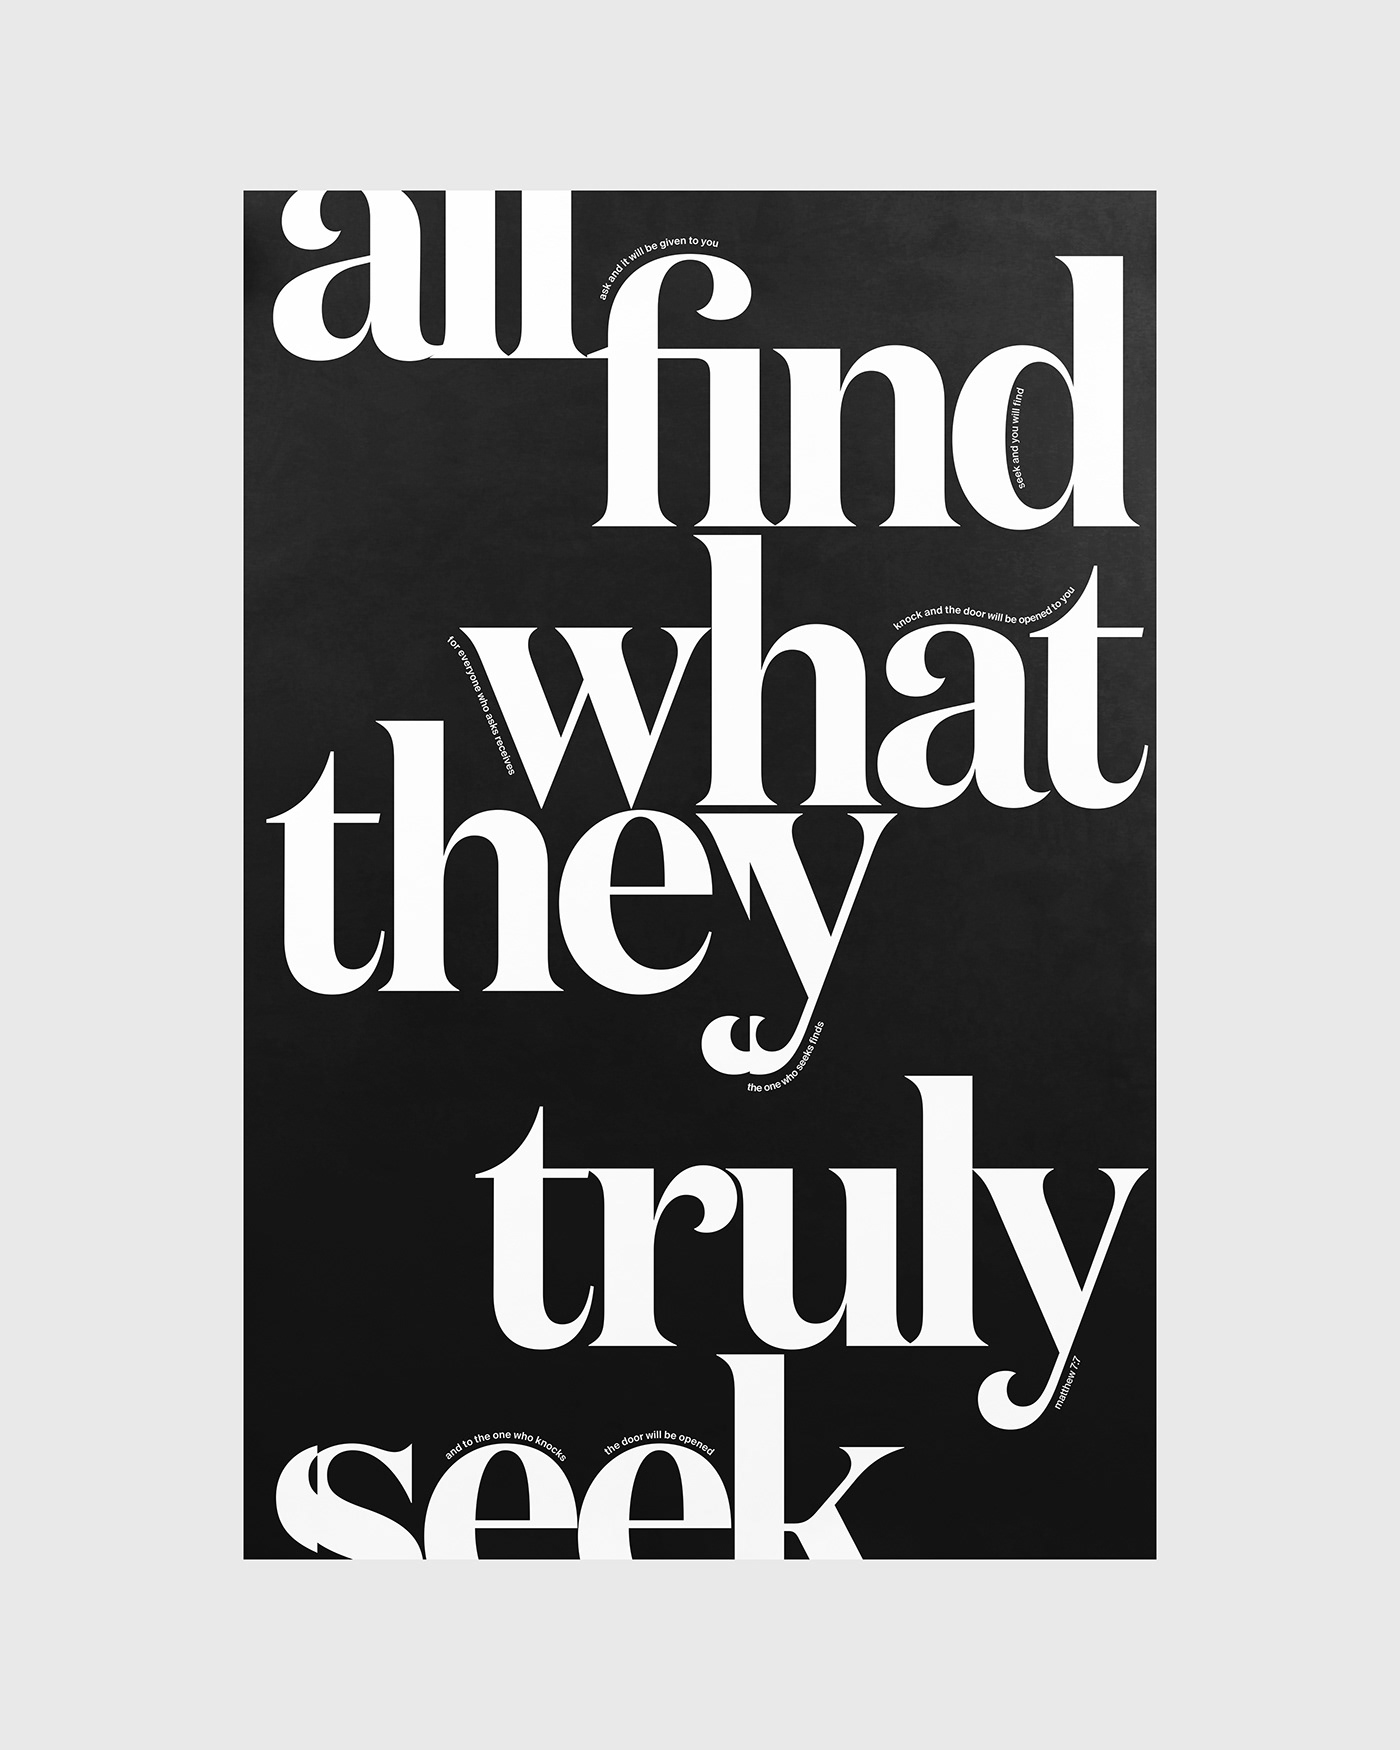 All Find What They Truly Seek poster by Xtian Miller